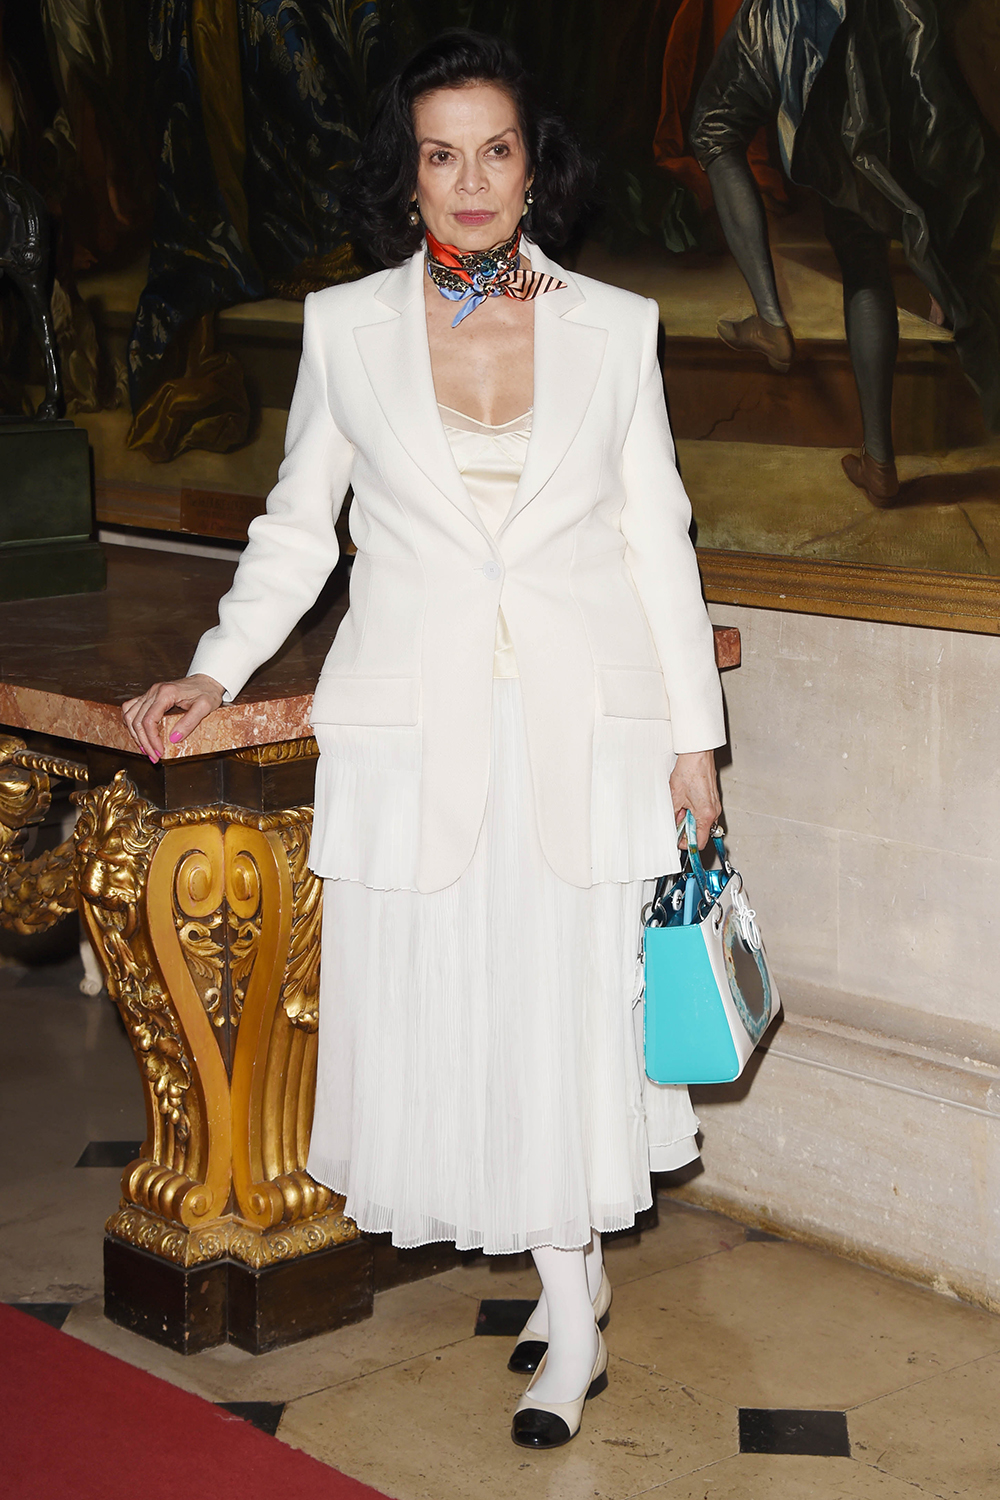 Bianca Jagger takes a note out of her own style book in a white Le Smoking jacket and skirt at Christian Dior's spring summer 2017 Cruise collection at Blenheim Palace in England.